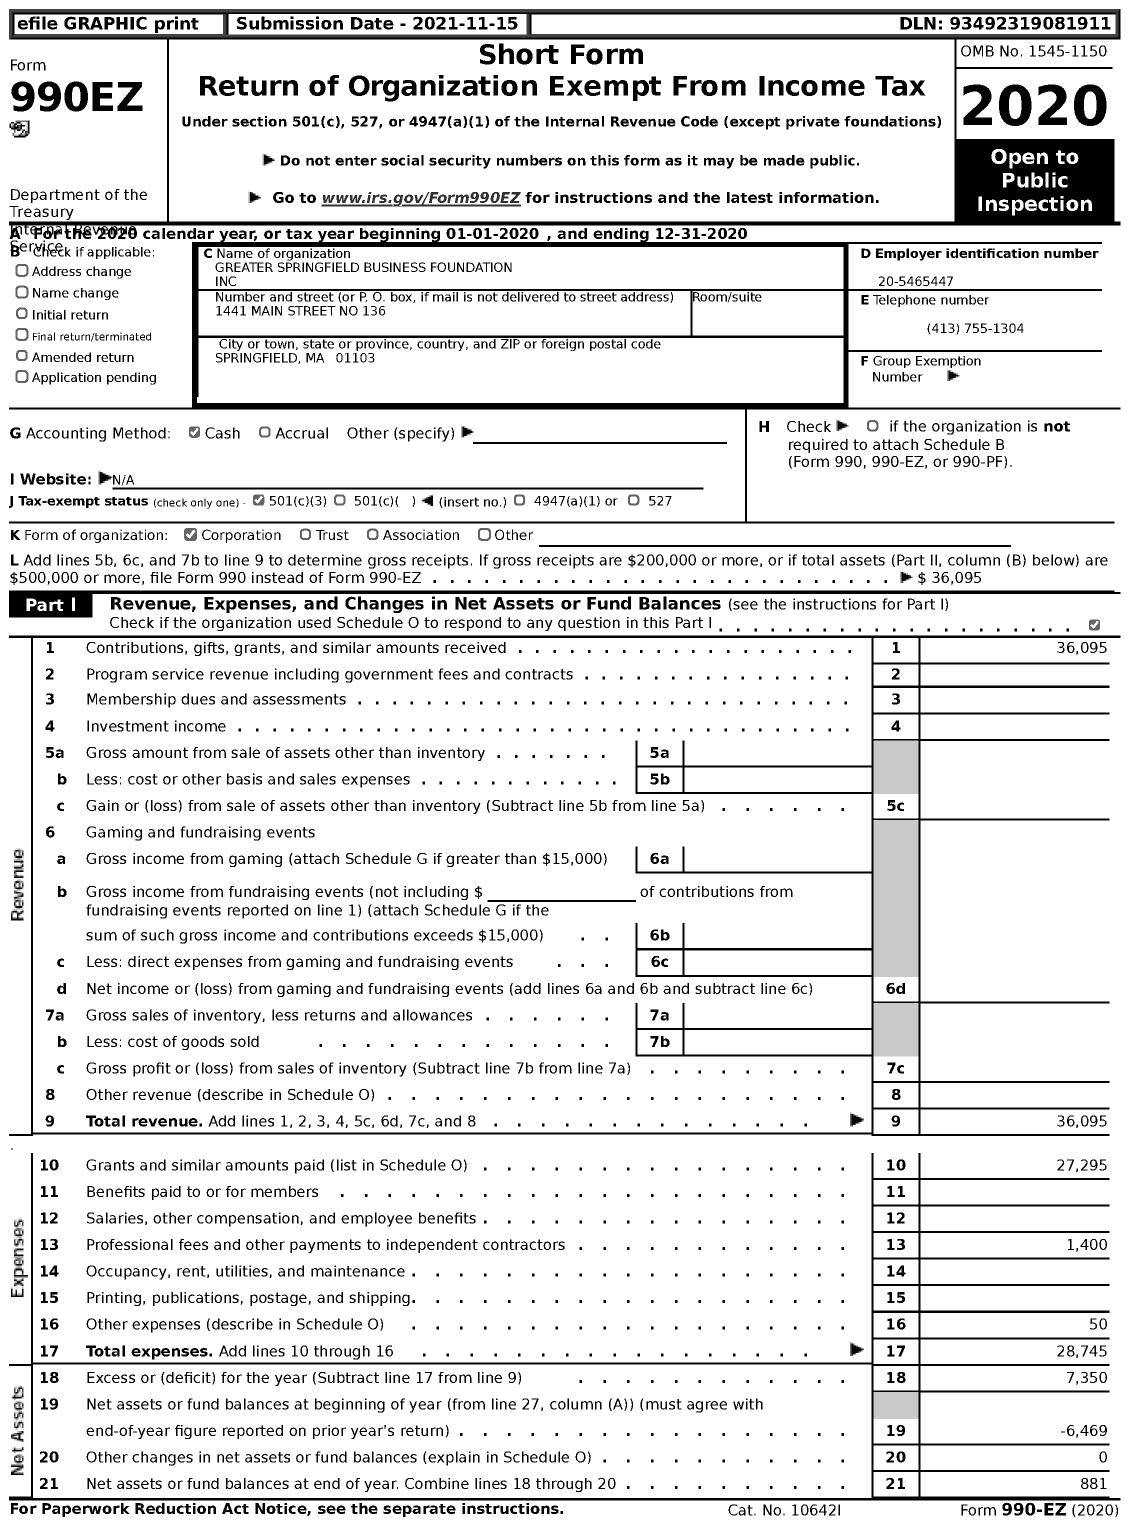 Image of first page of 2020 Form 990EZ for Greater Springfield Business Foundation